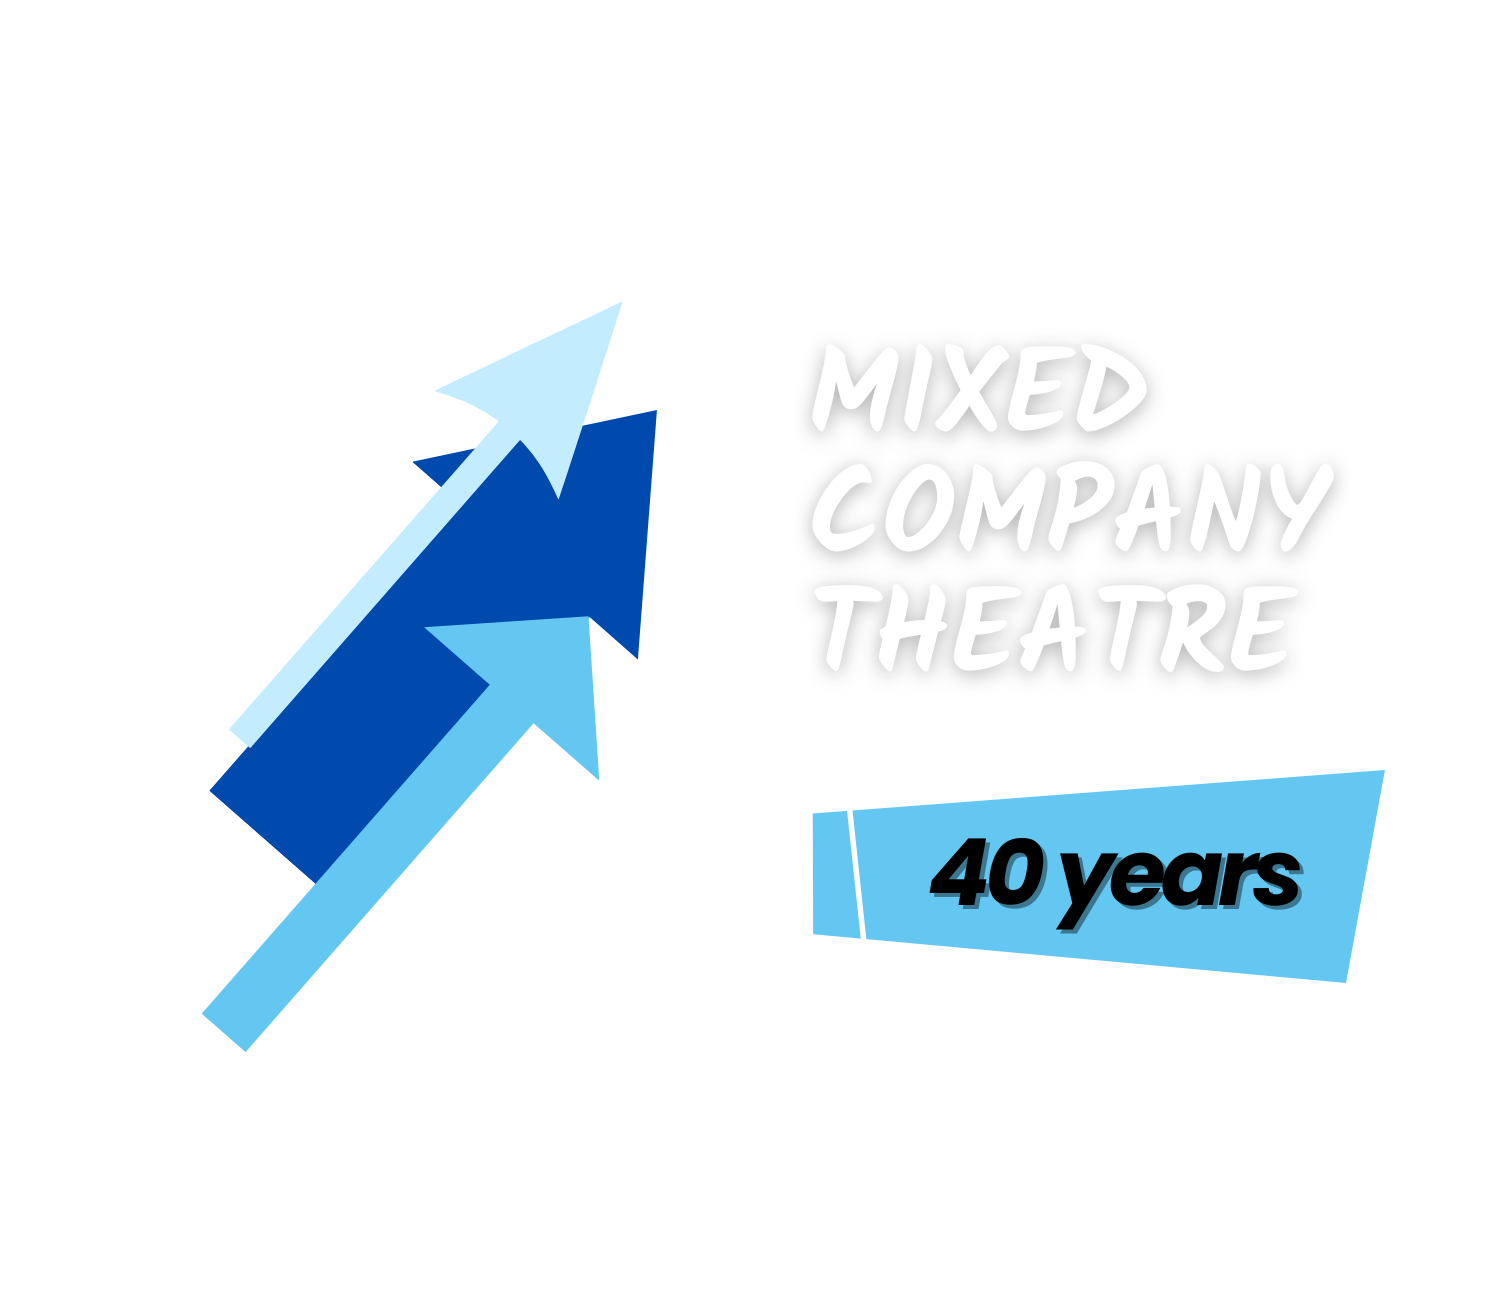 The logo for Mixed Company Theatre.